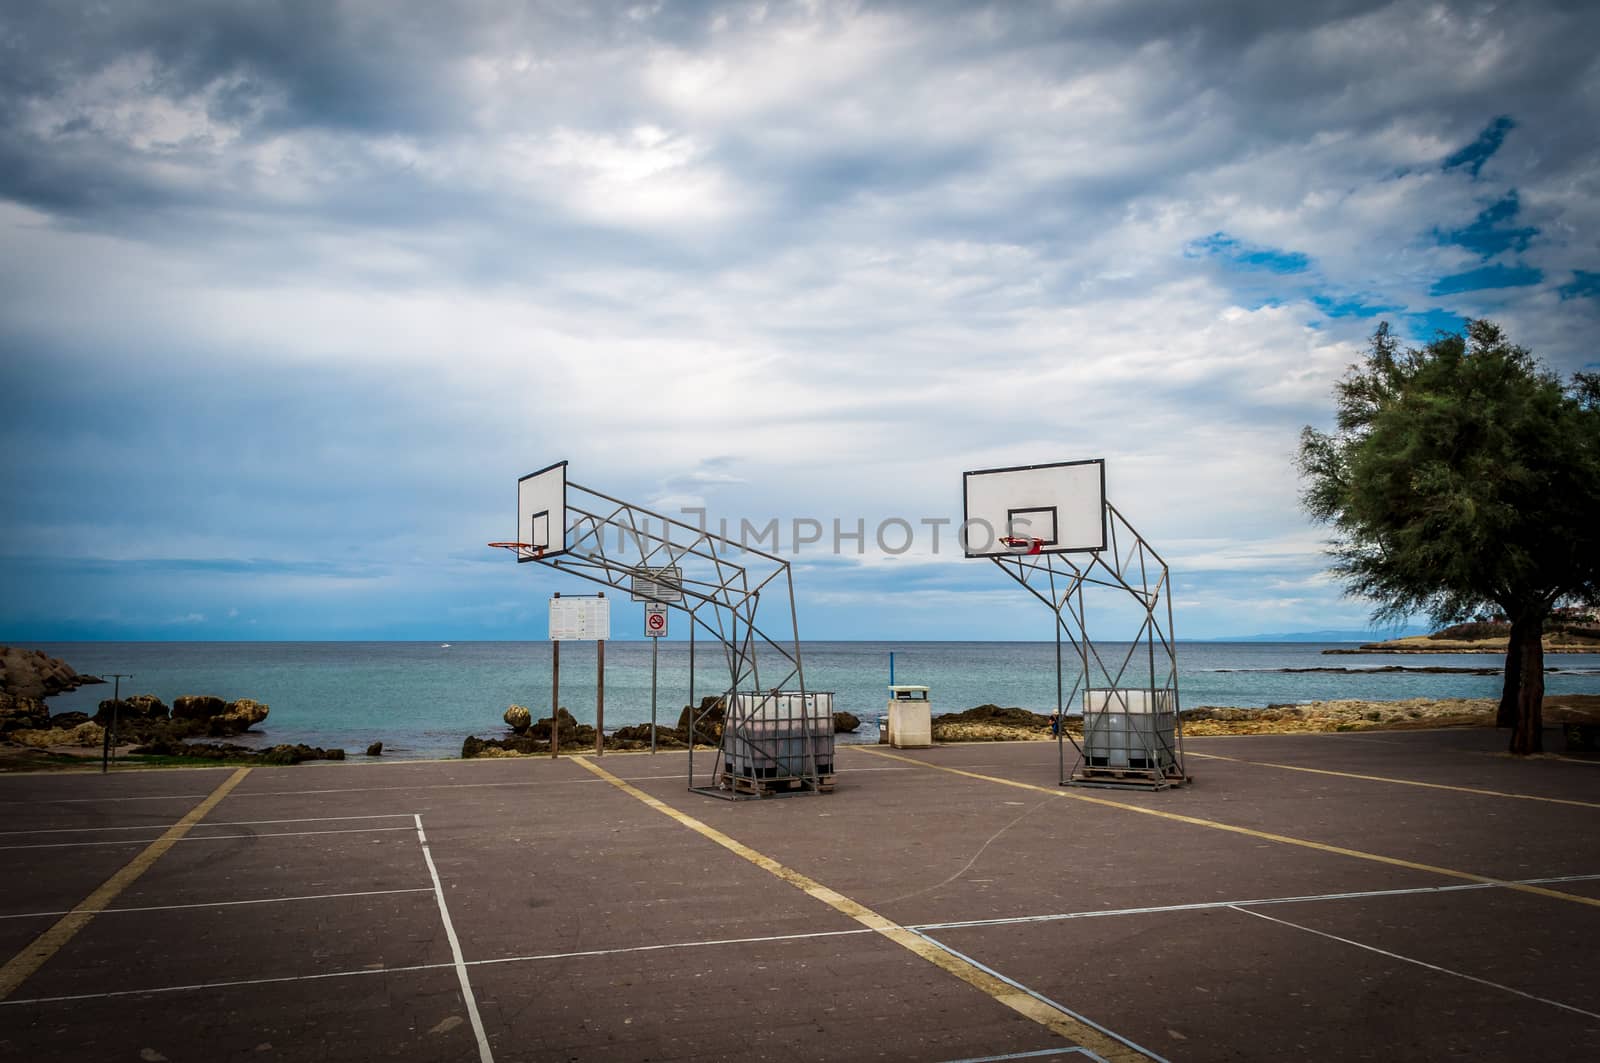 Basketball playground by the sea in a cloudy day of autumn - Porto Tores - Sardinia